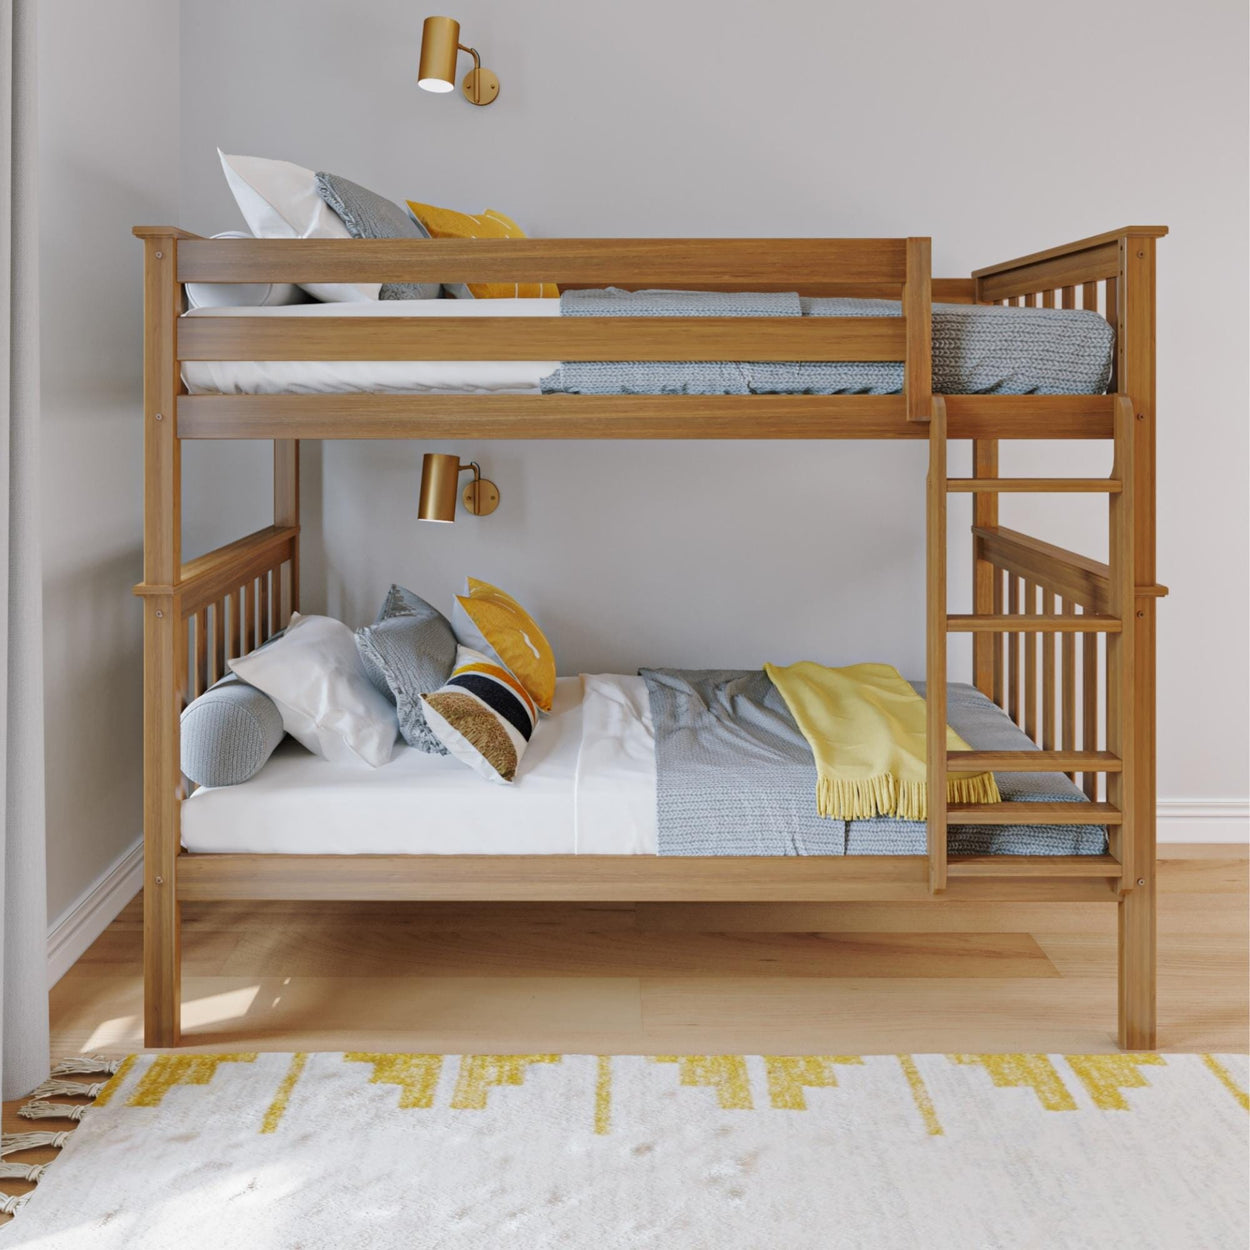 180201-007 : Bunk Beds Classic Twin over Twin Bunk Bed, Pecan